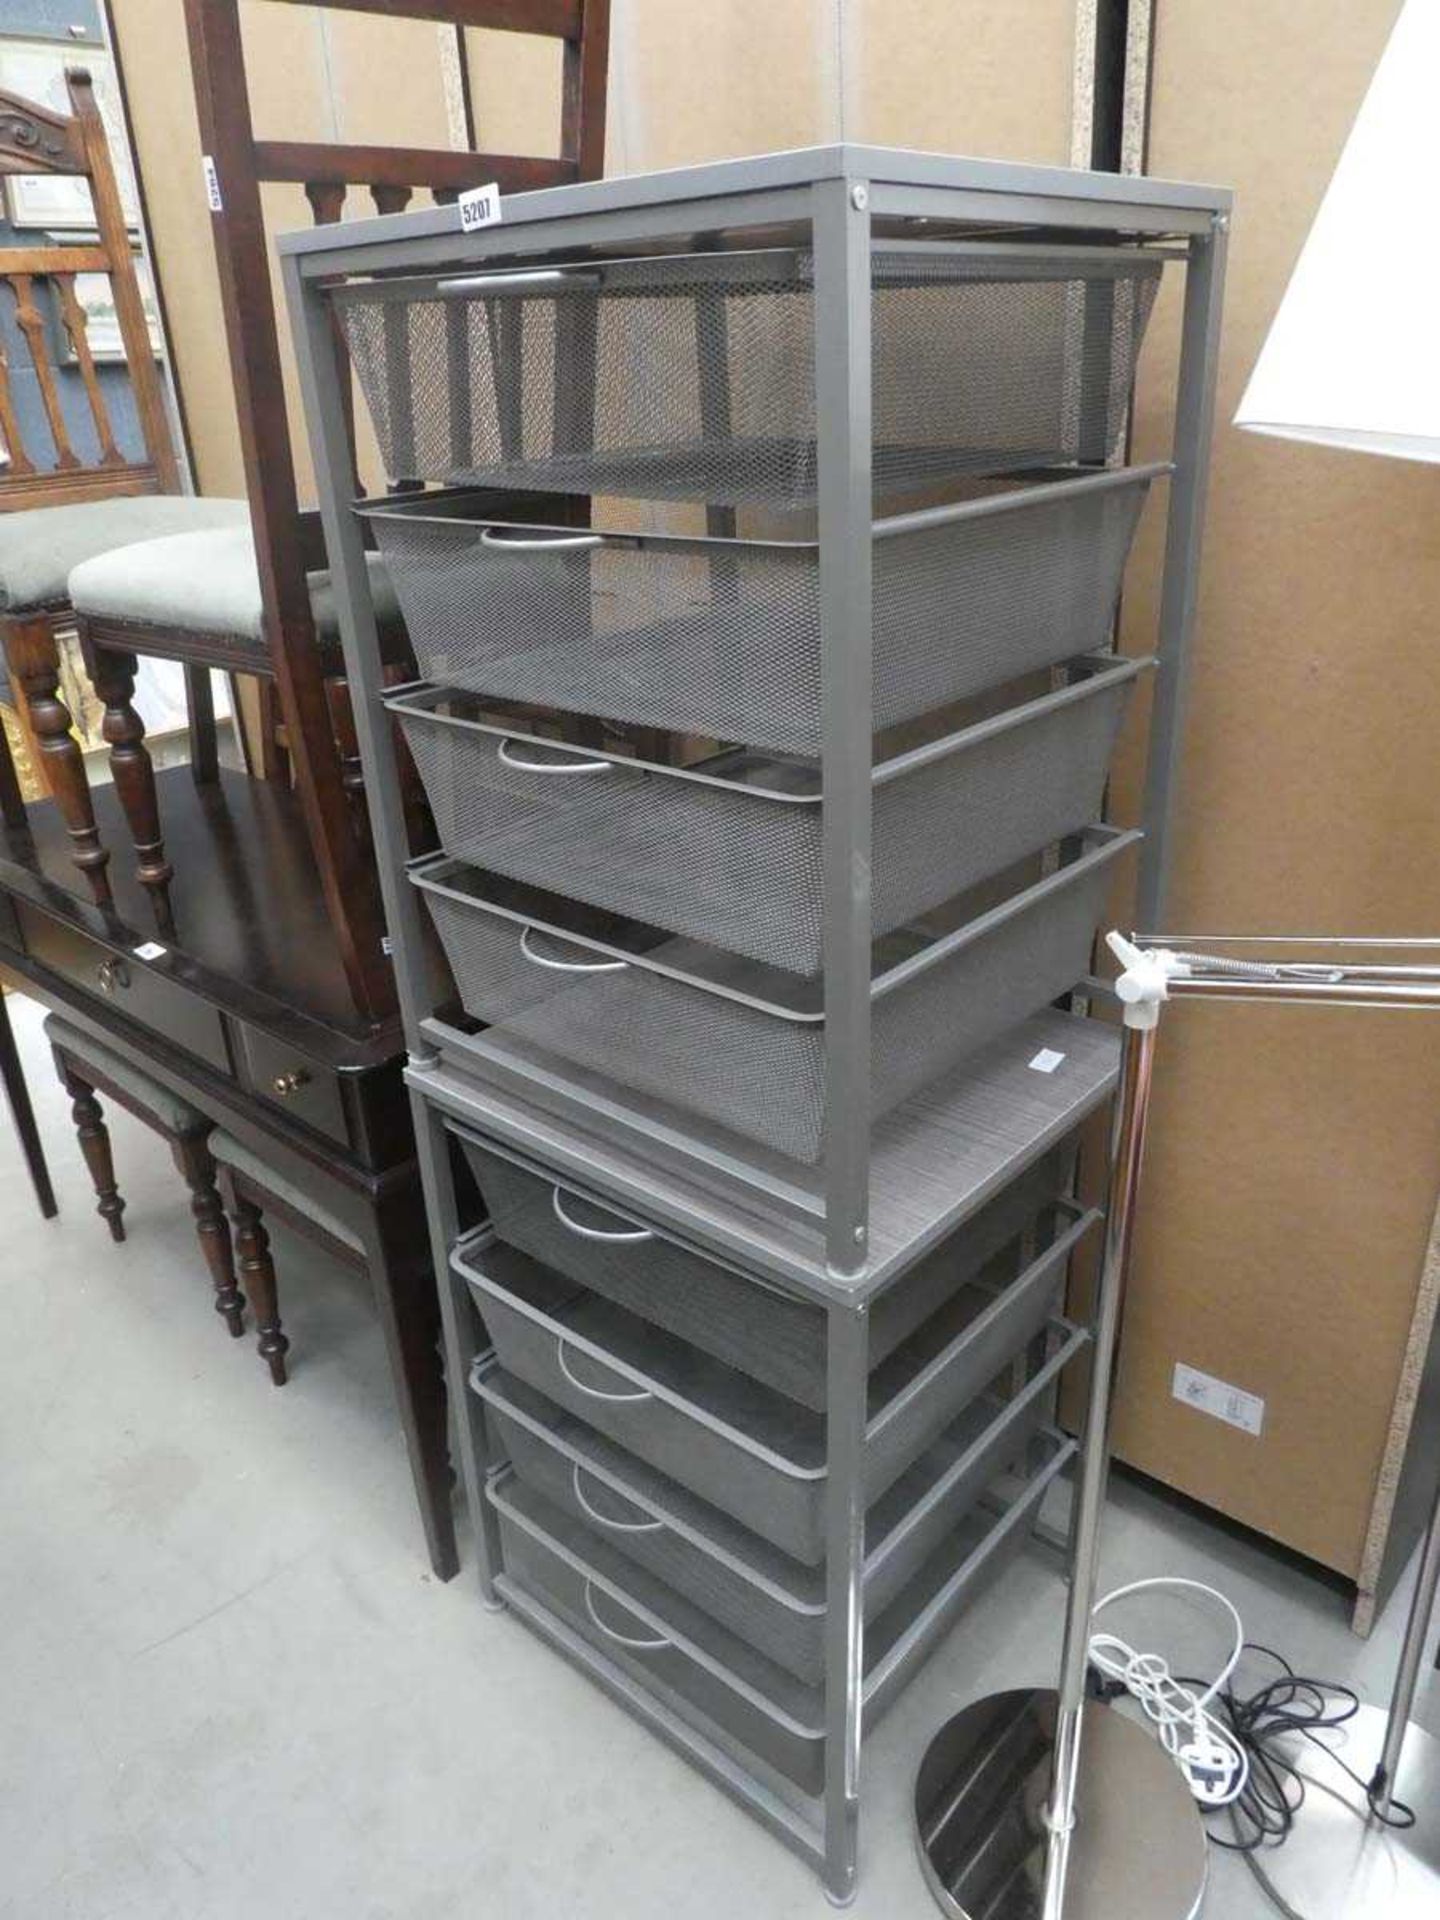 Pair of IKEA storage units with mesh work drawers